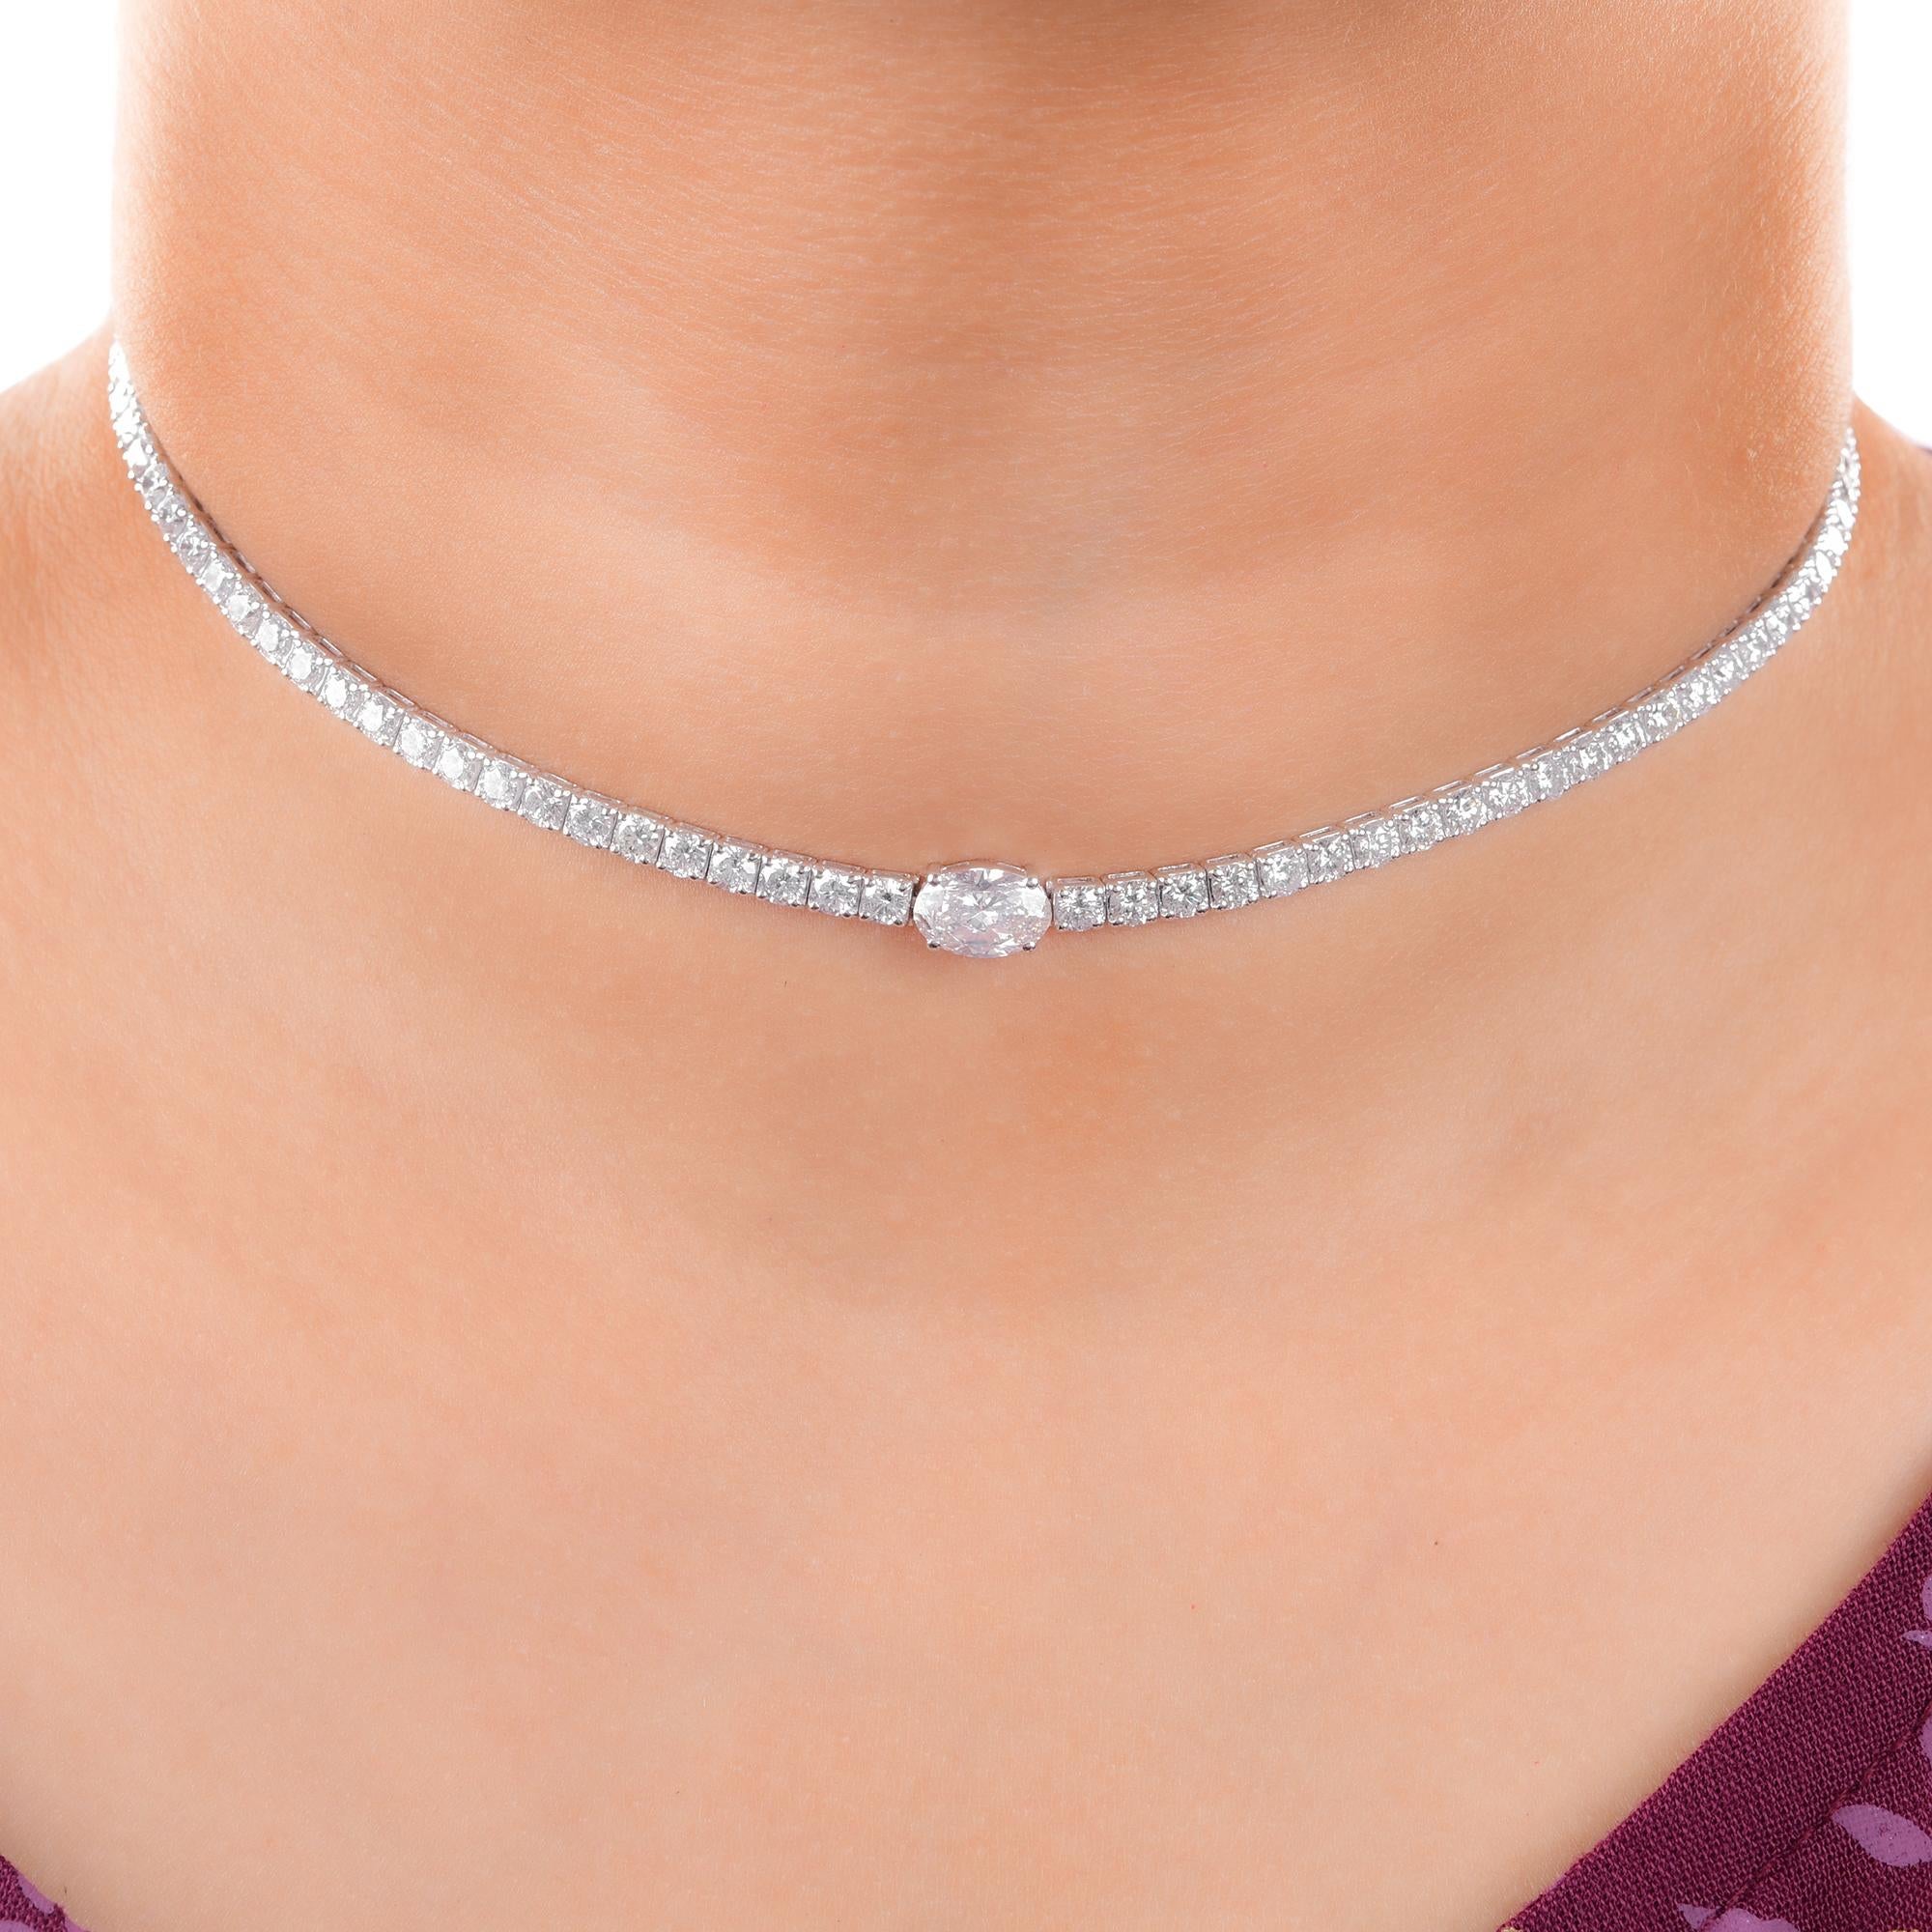 Introducing the epitome of luxury and elegance: the New Natural 9.25 Carat Oval & Round Diamond Choker Necklace, meticulously crafted in 18 Karat White Gold, a radiant masterpiece that exudes sophistication and grace.

Item Code :- SECK-9180
Gross